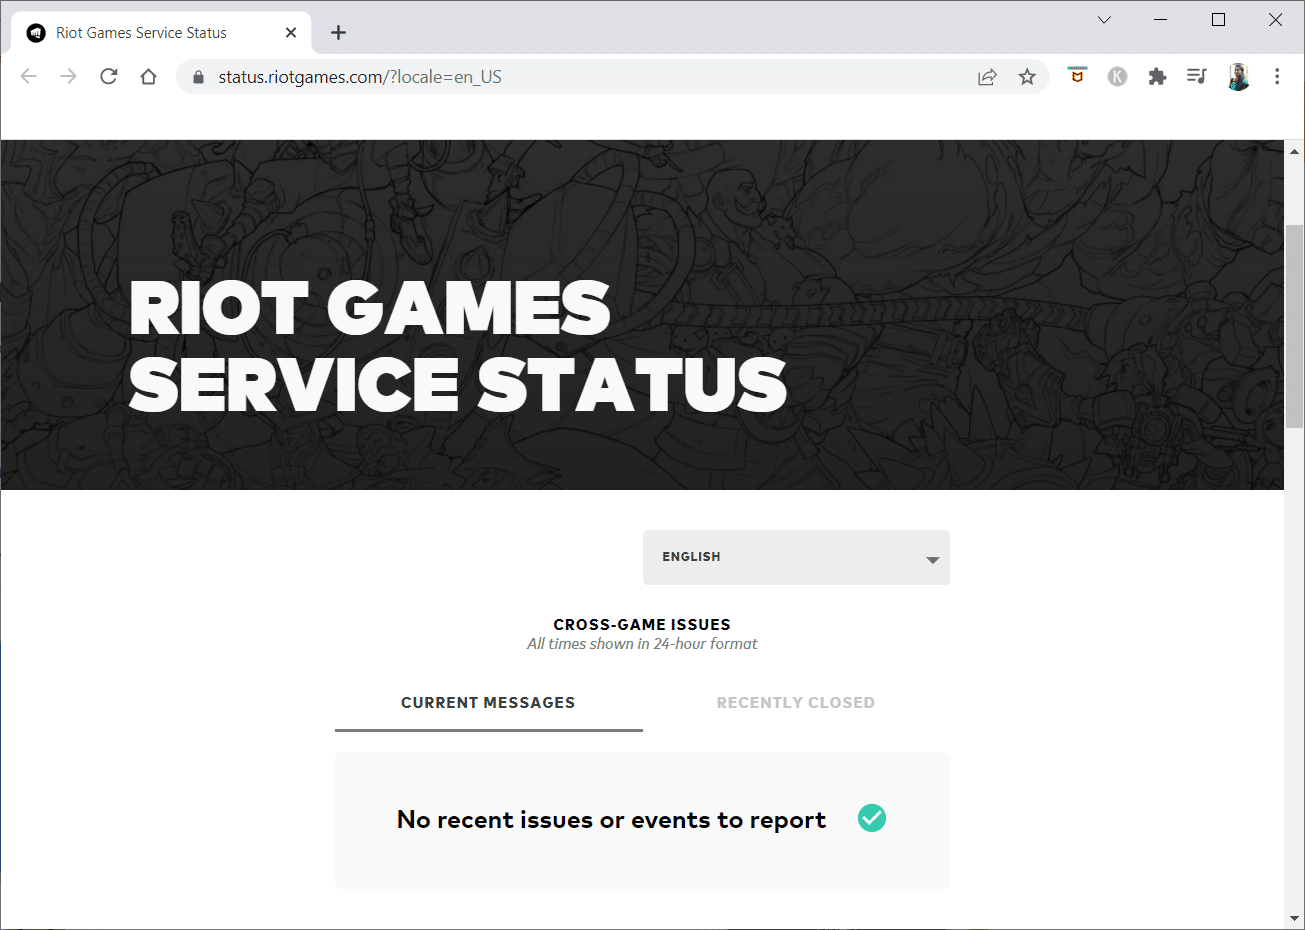 check the Riot Games Service Status website for further announcements regarding the server maintenance or downtime 